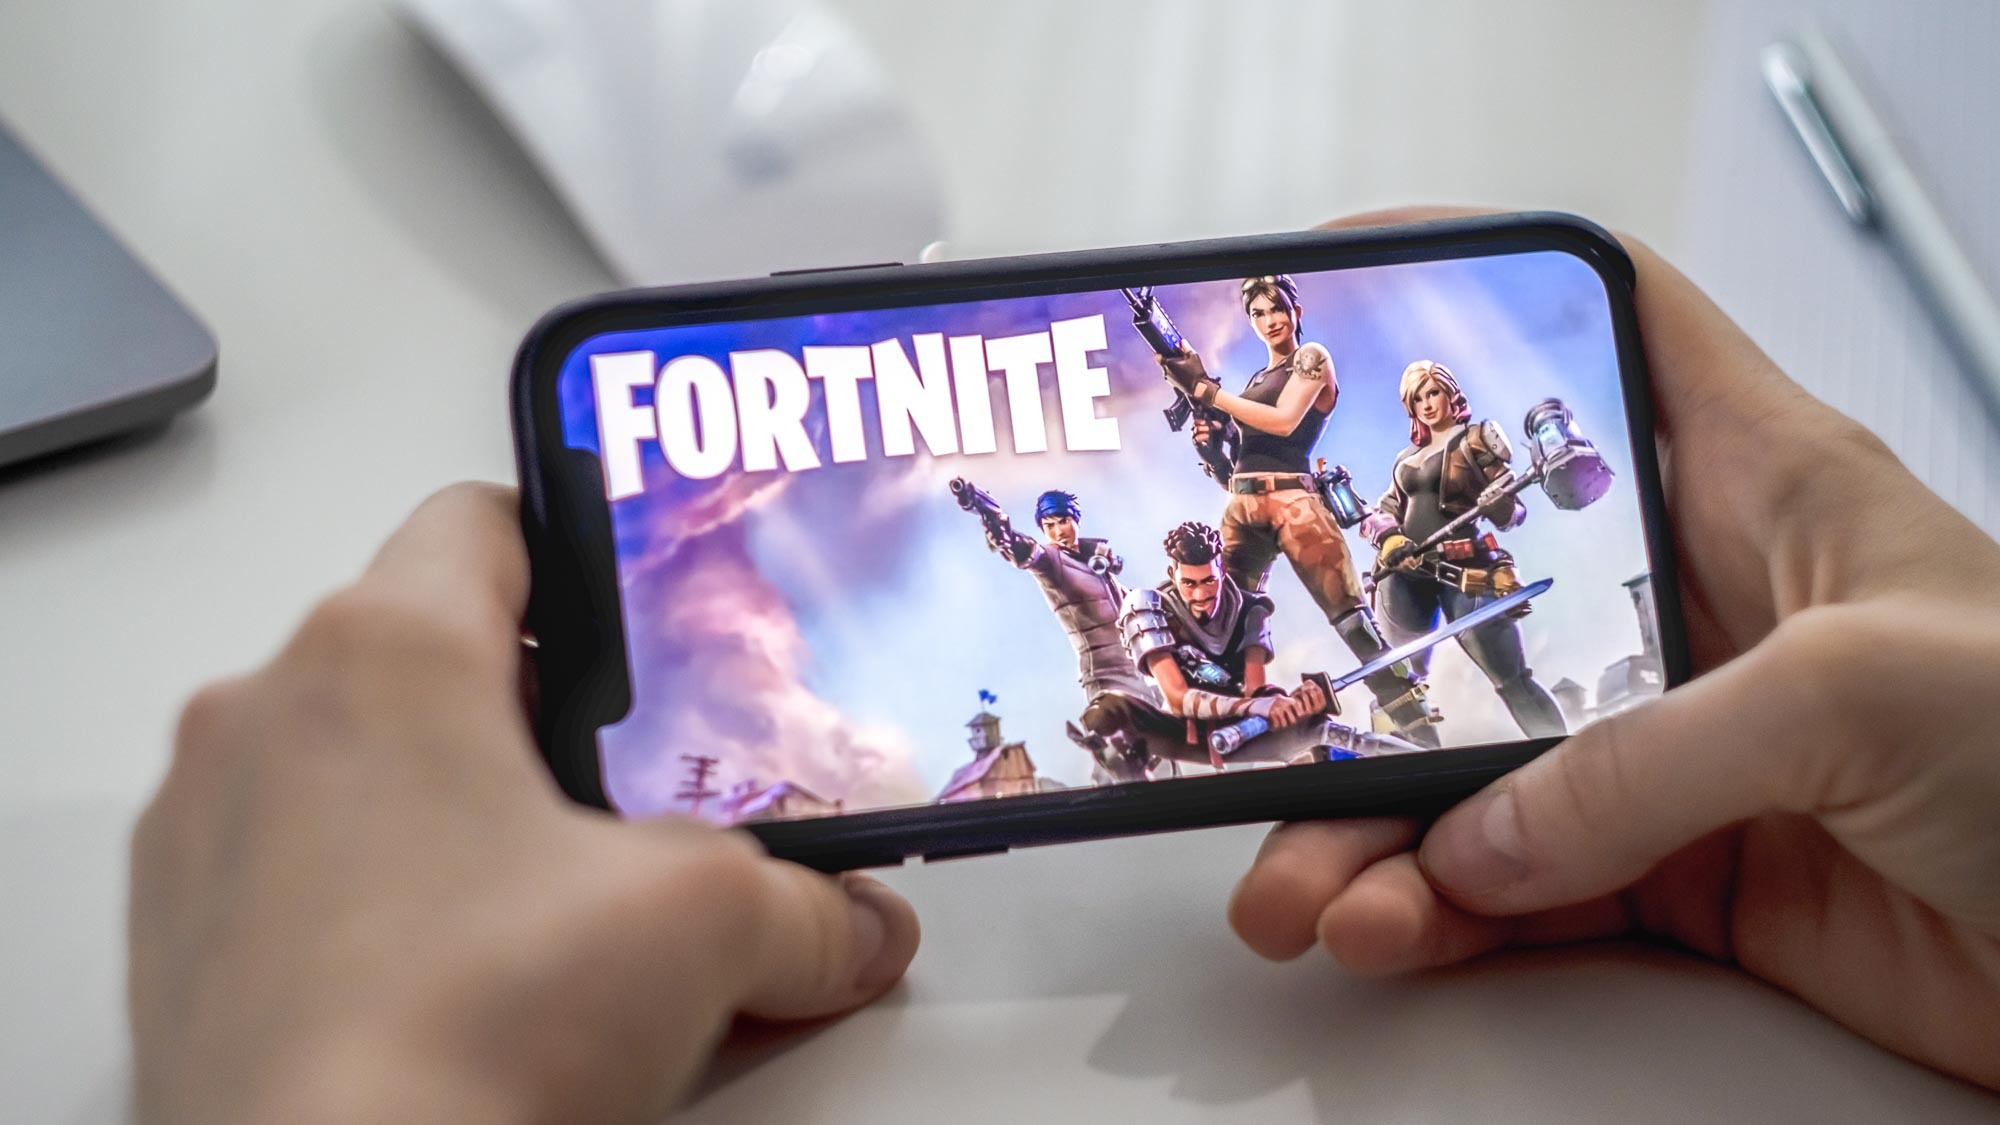 Nvidia is bringing Fortnite and other GeForce Now cloud games to iPhones  via Safari